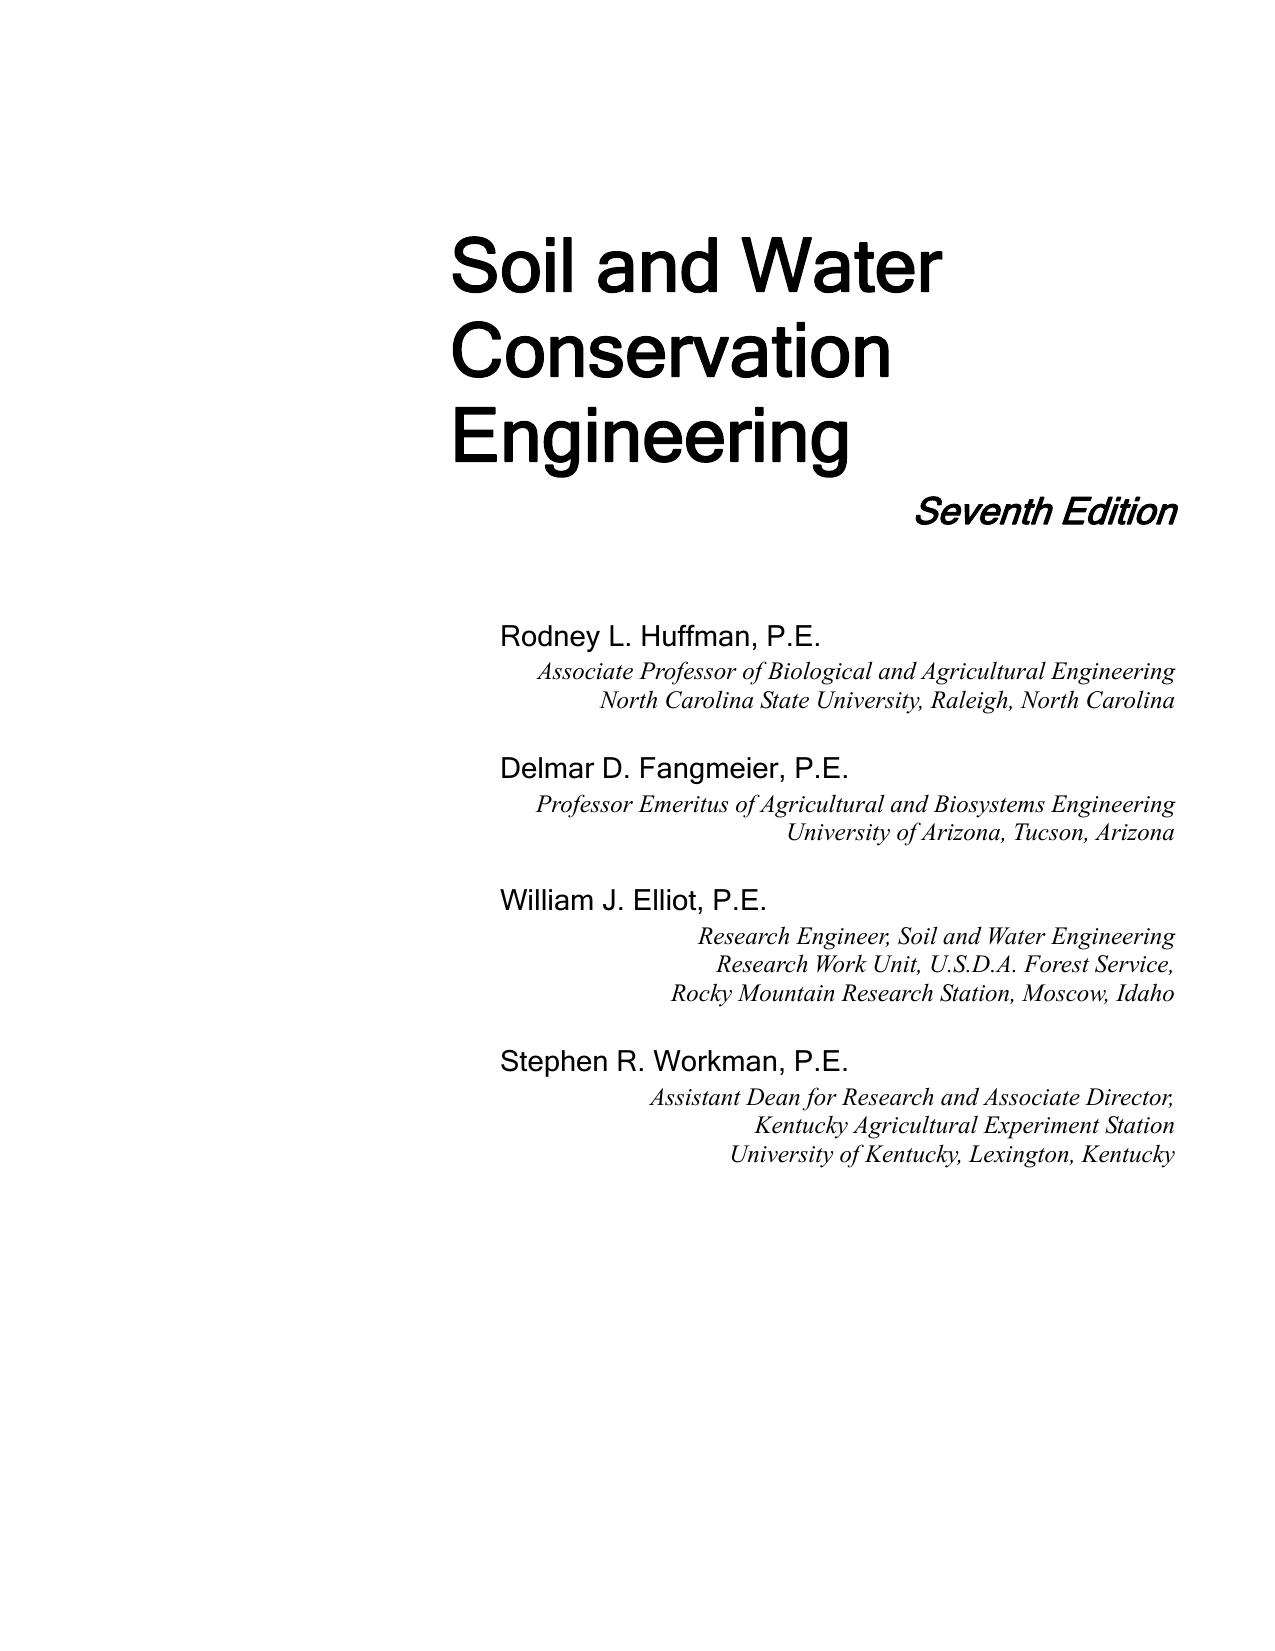 Soil and Water Conservation Engineering 2013